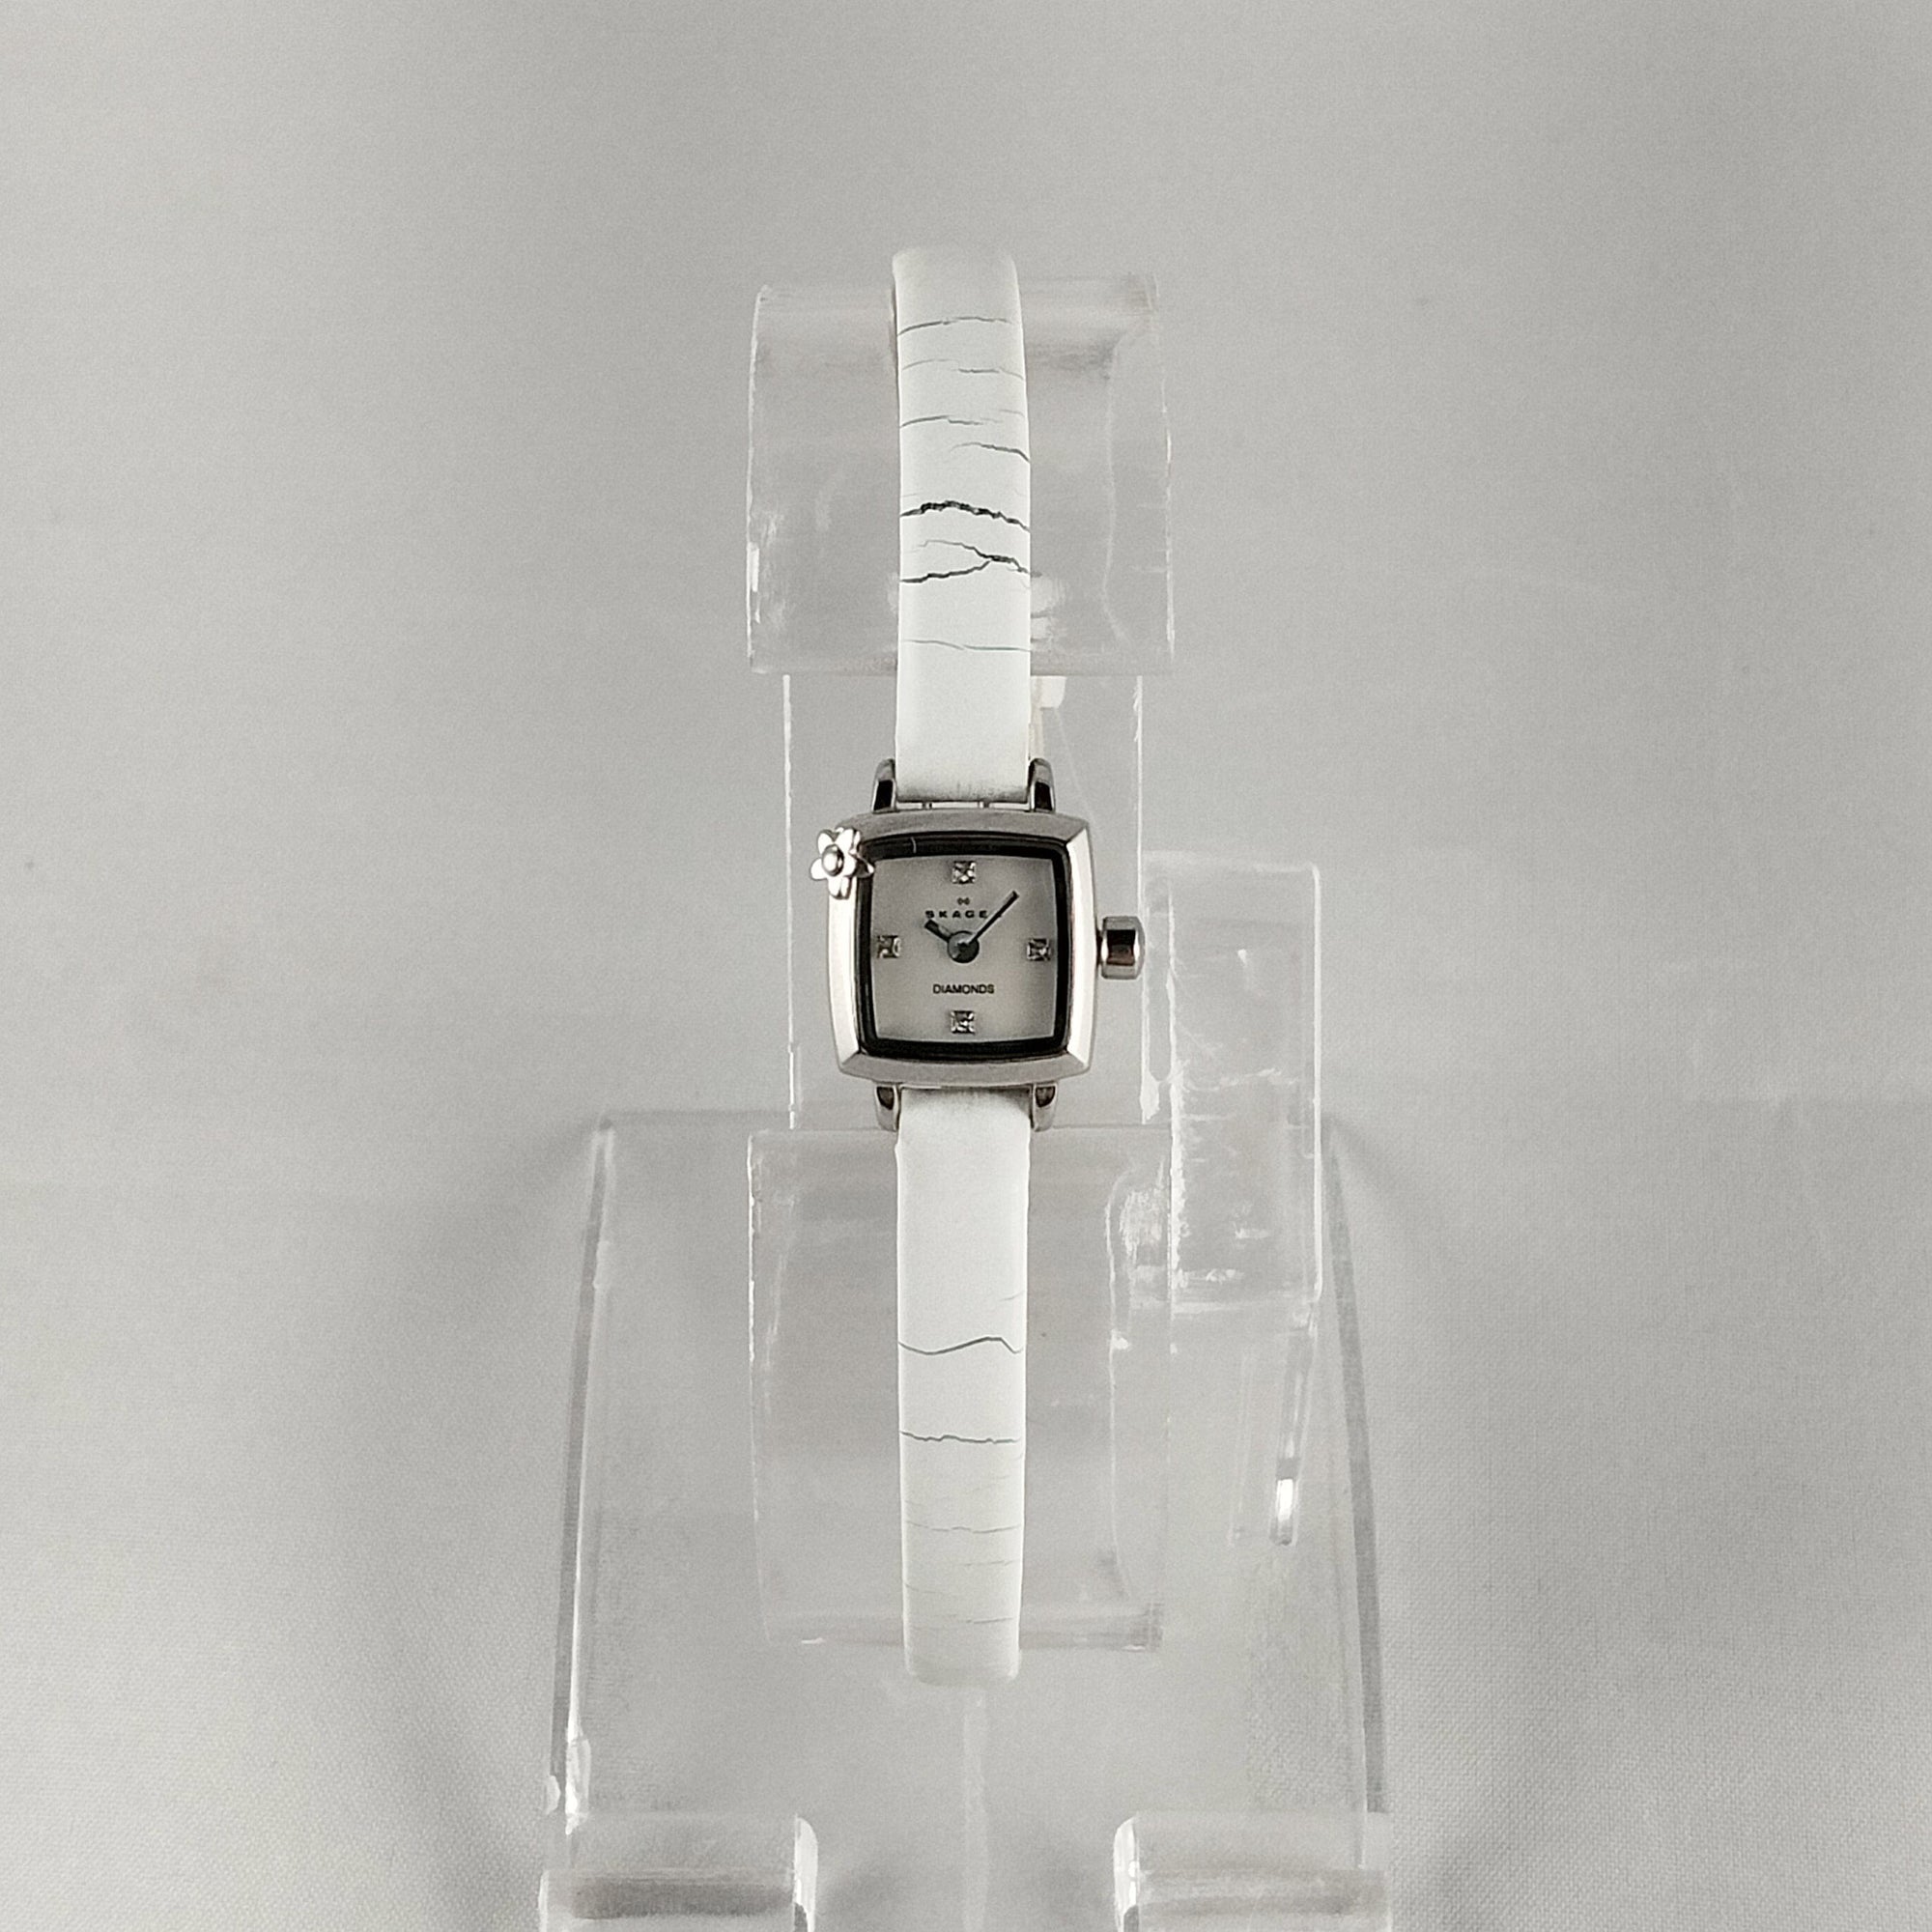 I Like Mikes Mid Century Modern Watches Skagen Women's Stainless Steel Watch, Tiny Square Face, White Genuine Leather Strap